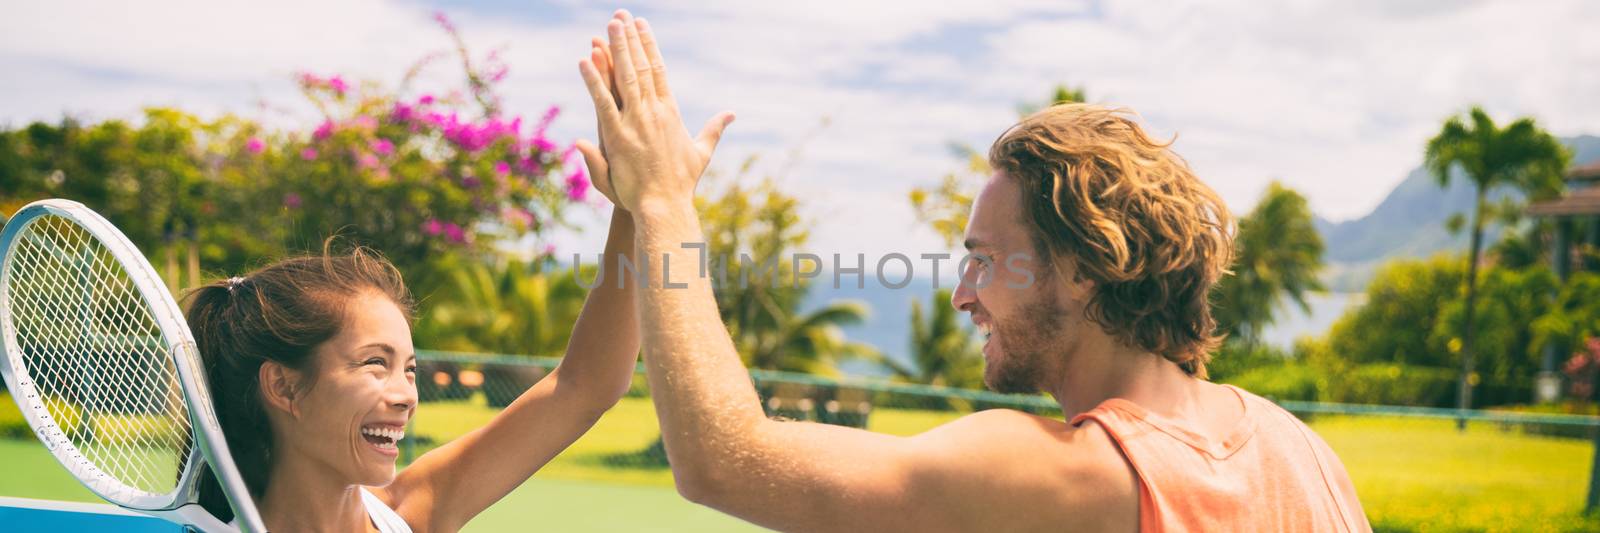 Summer sport tennis players having fun doing high five after game. Healthy lifestyle outdoor living mixed doubles banner panorama.